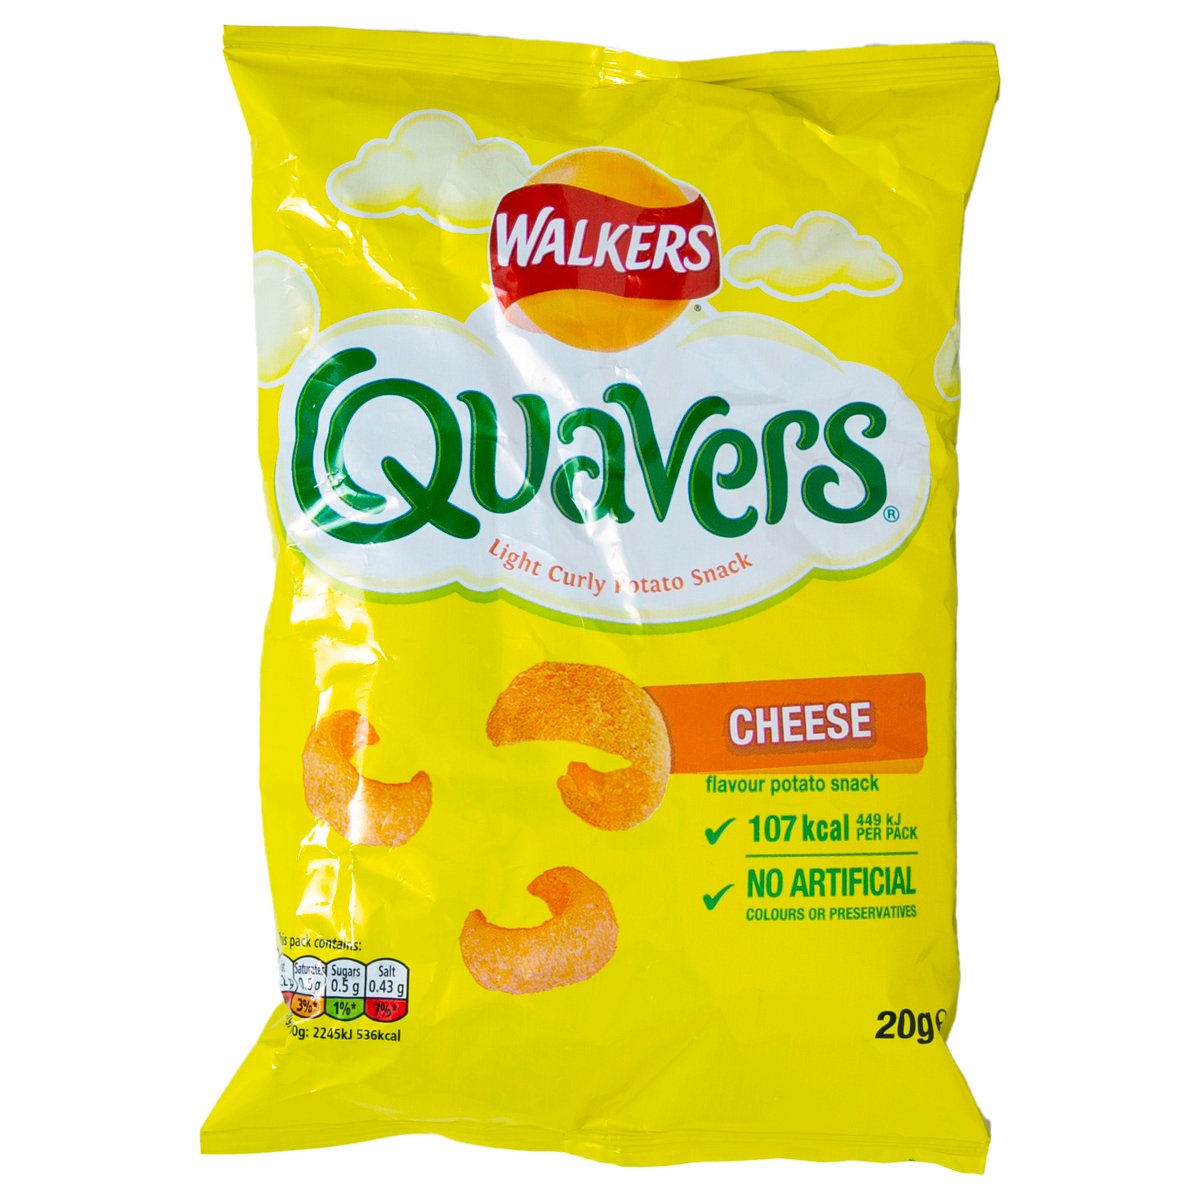 Walkers Quavers Potato Snack Cheese Flavour 20g